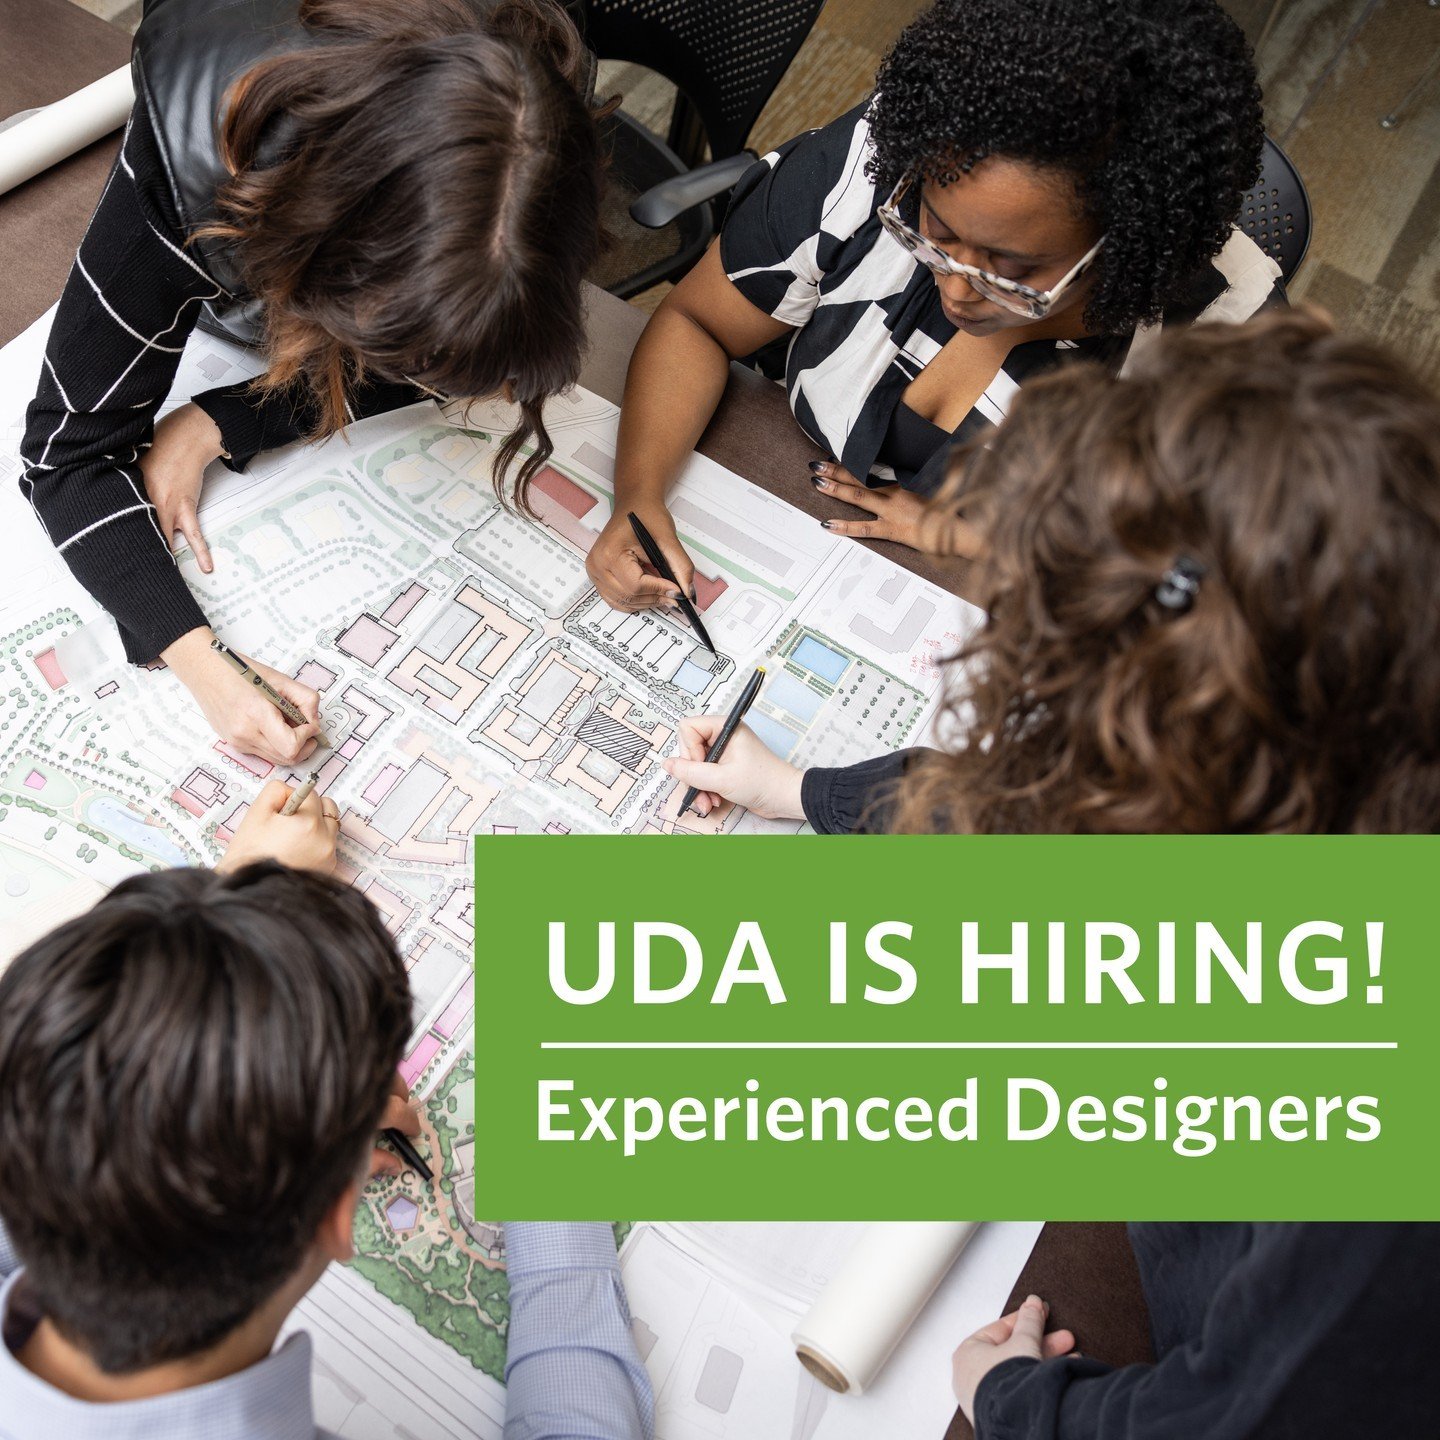 UDA is Hiring! Immerse yourself in the issues around urban design, planning, and architecture. We are a multi-disciplined urban design practice based in Pittsburgh, and we are seeking experienced designers to join our team.

Learn more and how to app